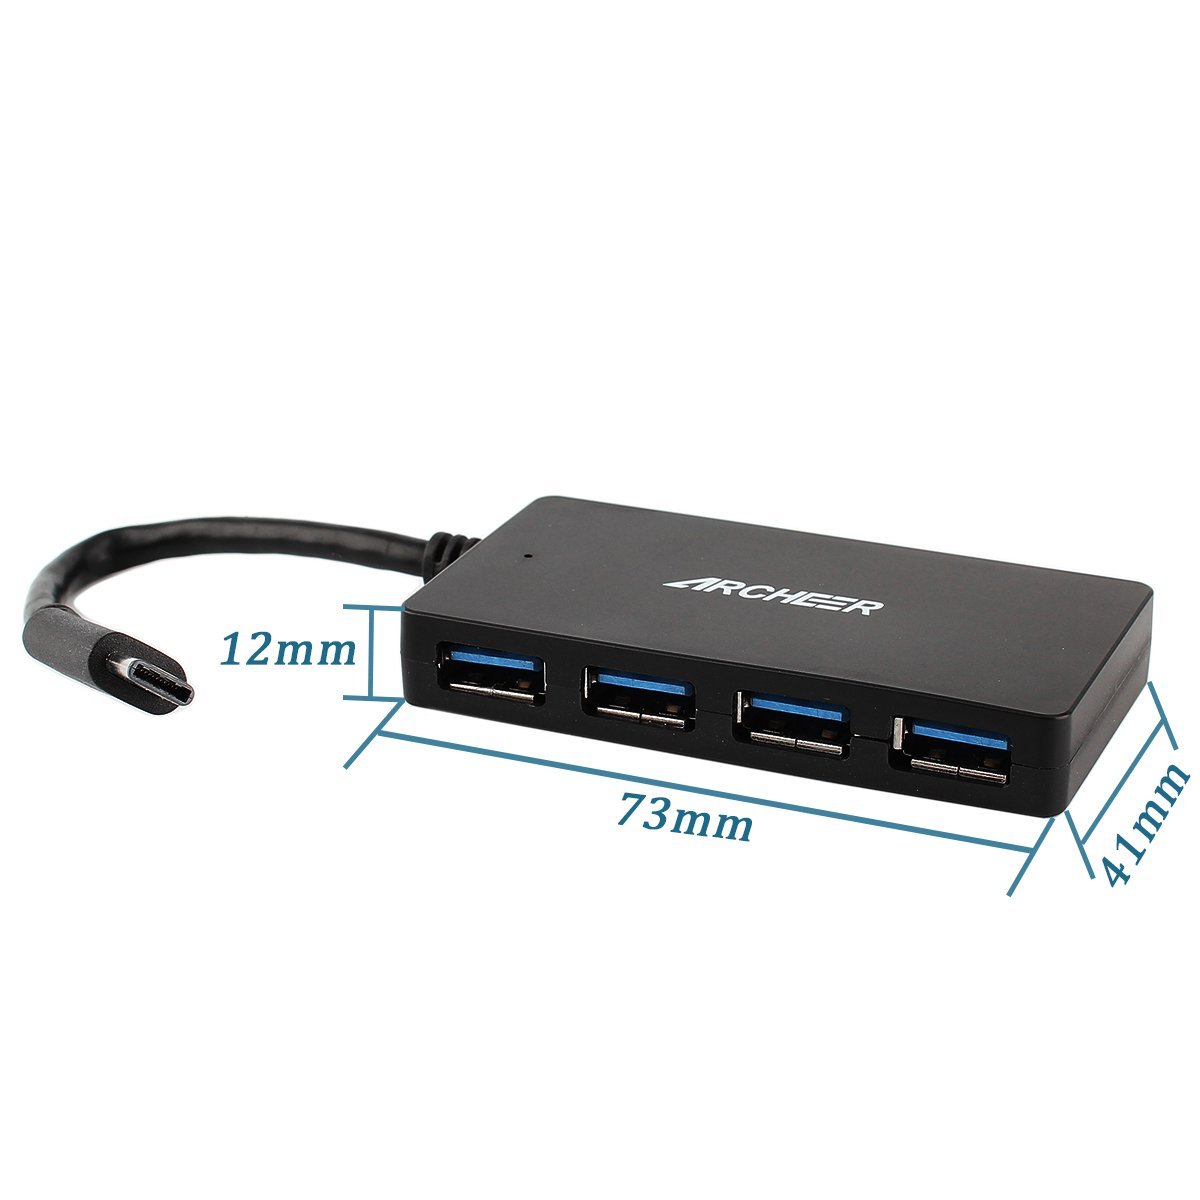 ARCHEER-USB-31-Type-C-4-Port-HUB-Adapter-Connector-For-New-MacBook--Chromebook-Pixel-2015-Edition-1033877